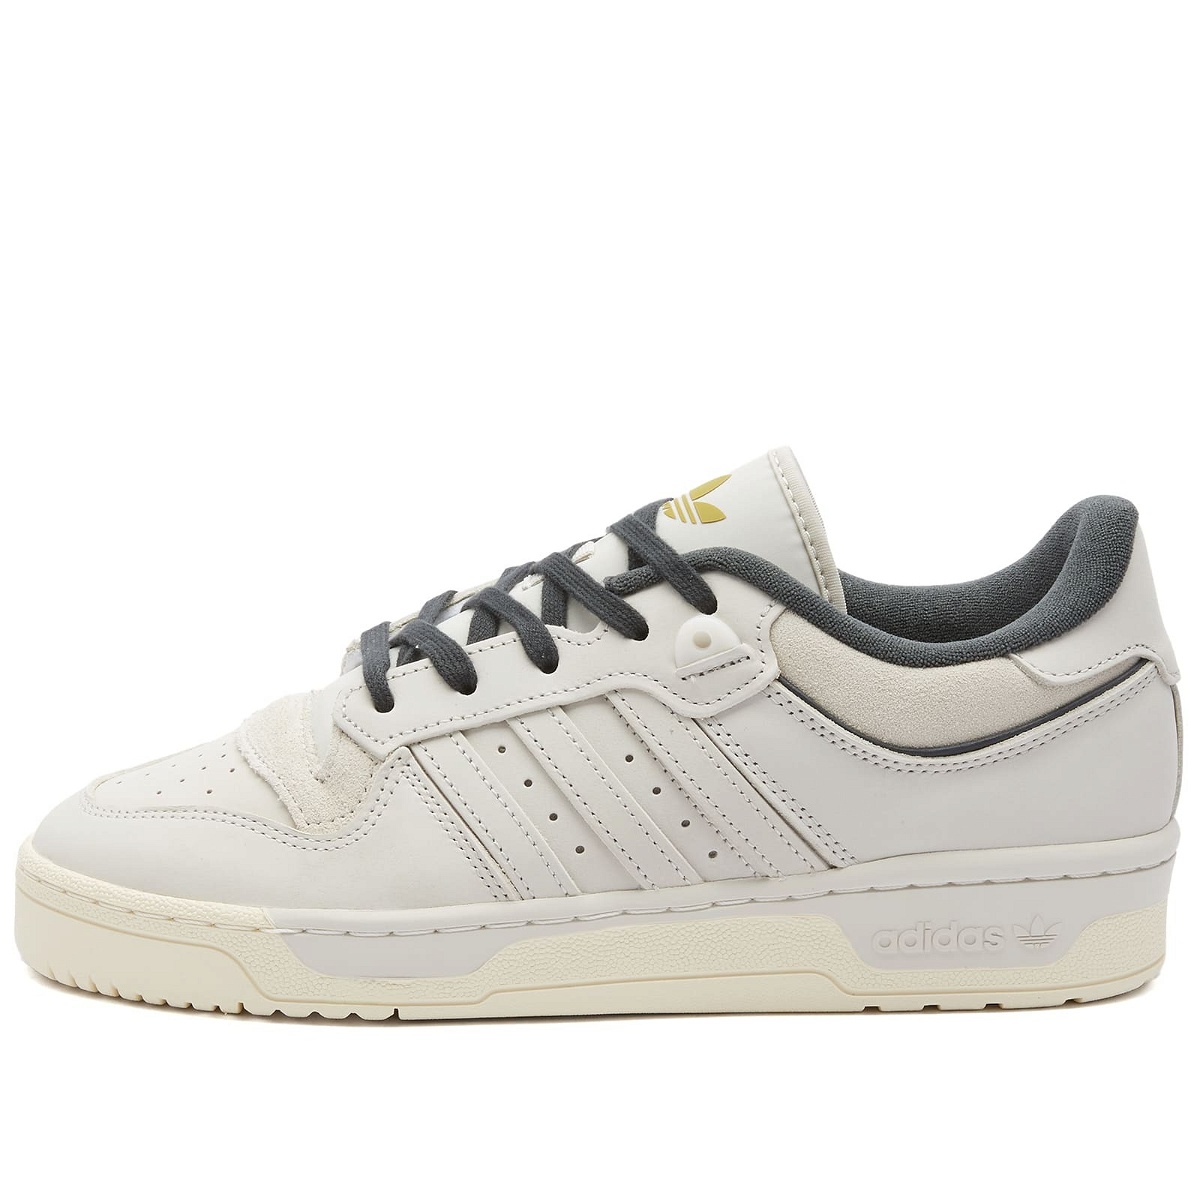 Adidas Rivalry 86 Low 2.5 Sneakers in Talc/Carbon/Cream White